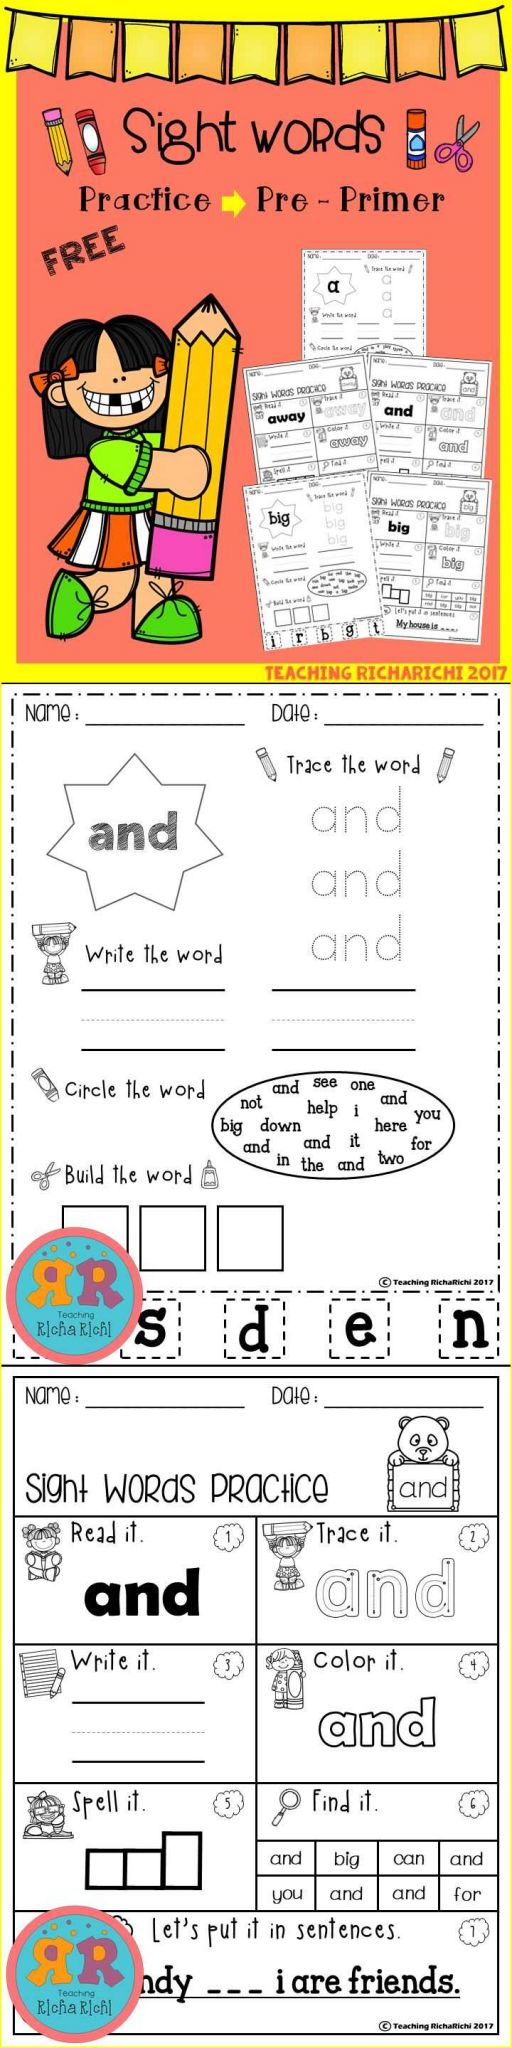 Free First Grade Spelling Worksheets with 8756 Best Best Of Thanksgiving Kindergarten & First Grade Images